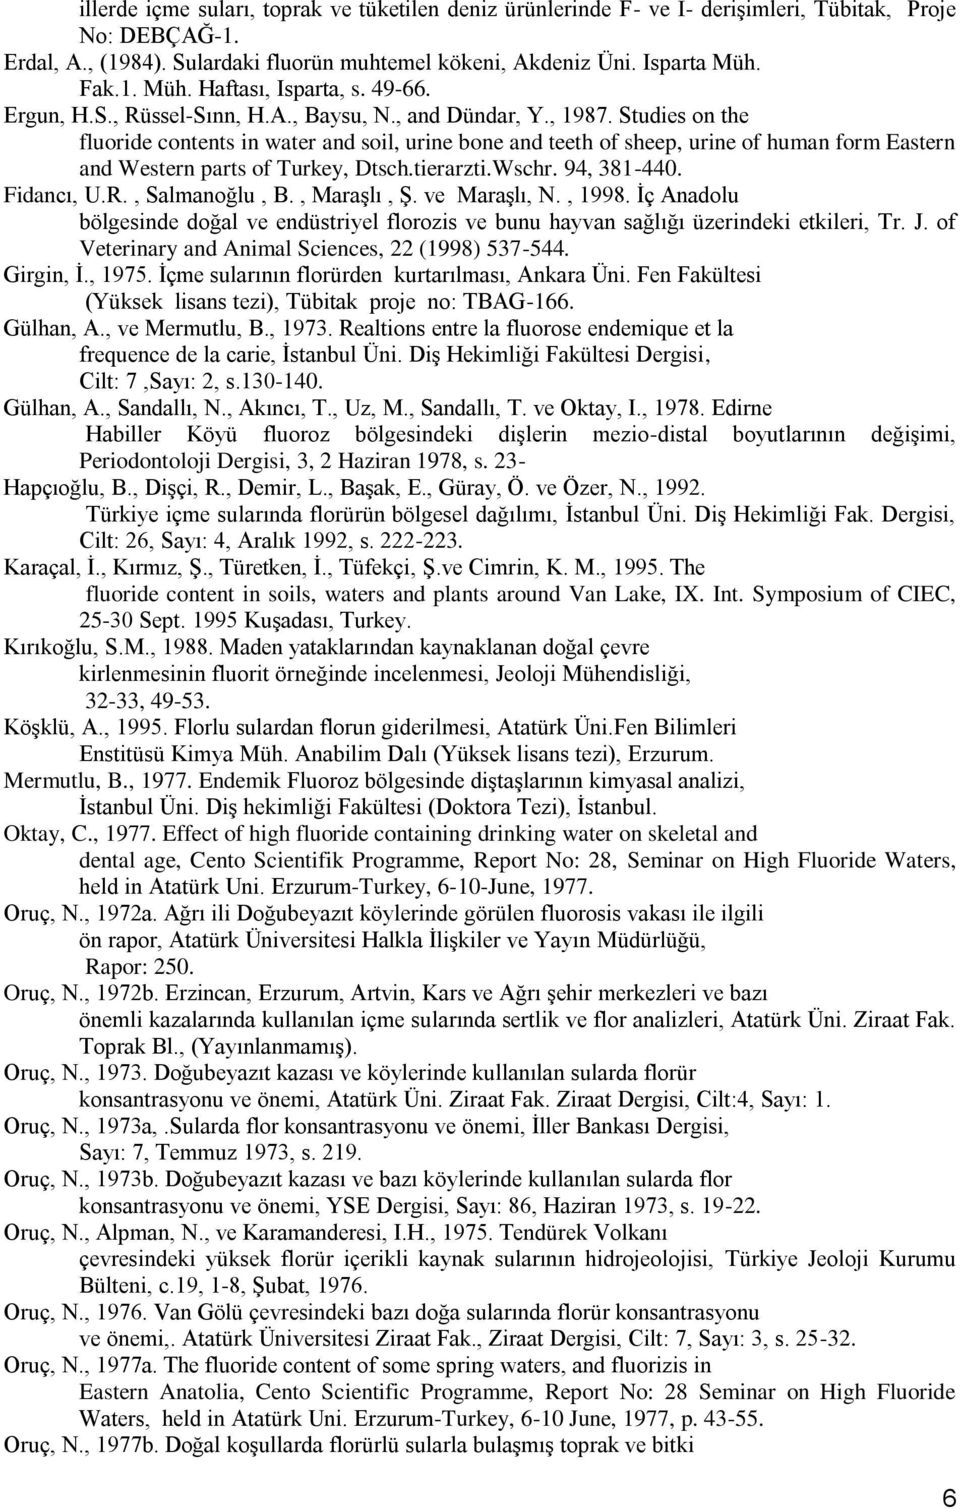 Studies on the fluoride contents in water and soil, urine bone and teeth of sheep, urine of human form Eastern and Western parts of Turkey, Dtsch.tierarzti.Wschr. 94, 381-440. Fidancı, U.R.